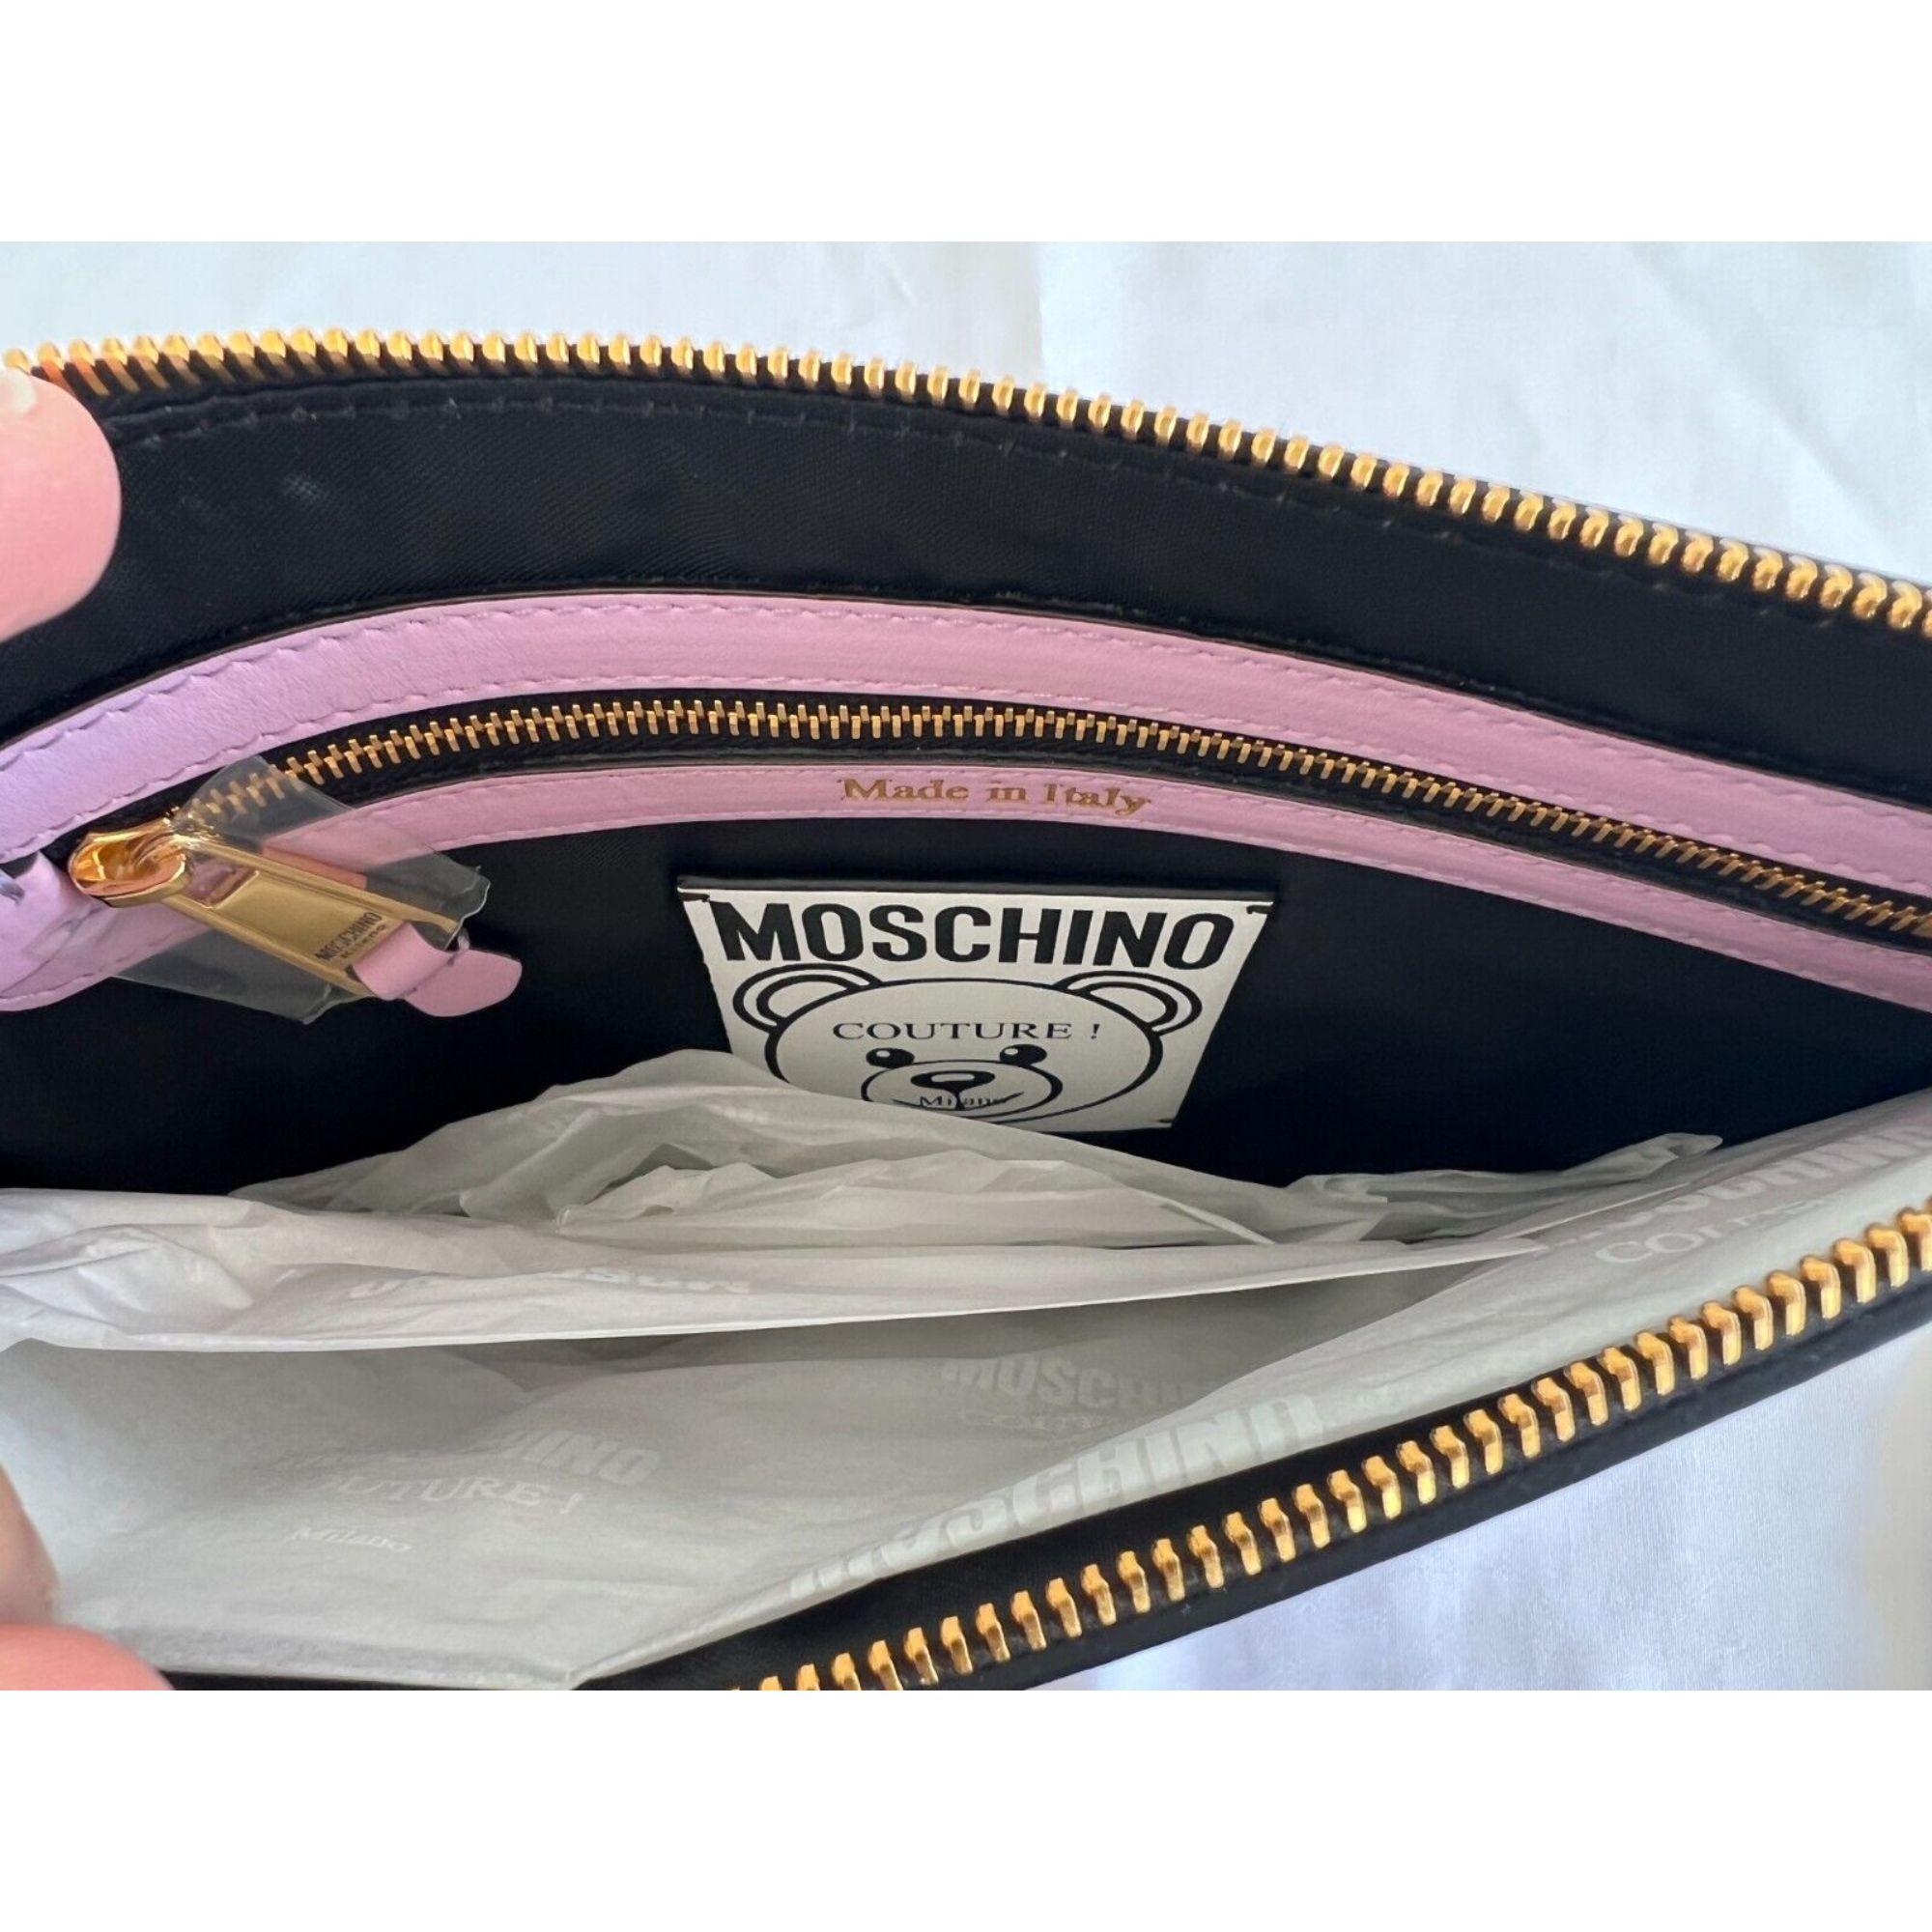 SS21 Moschino Couture Pink Clutch with Embroidered Teddy Bear by Jeremy Scott In New Condition For Sale In Matthews, NC